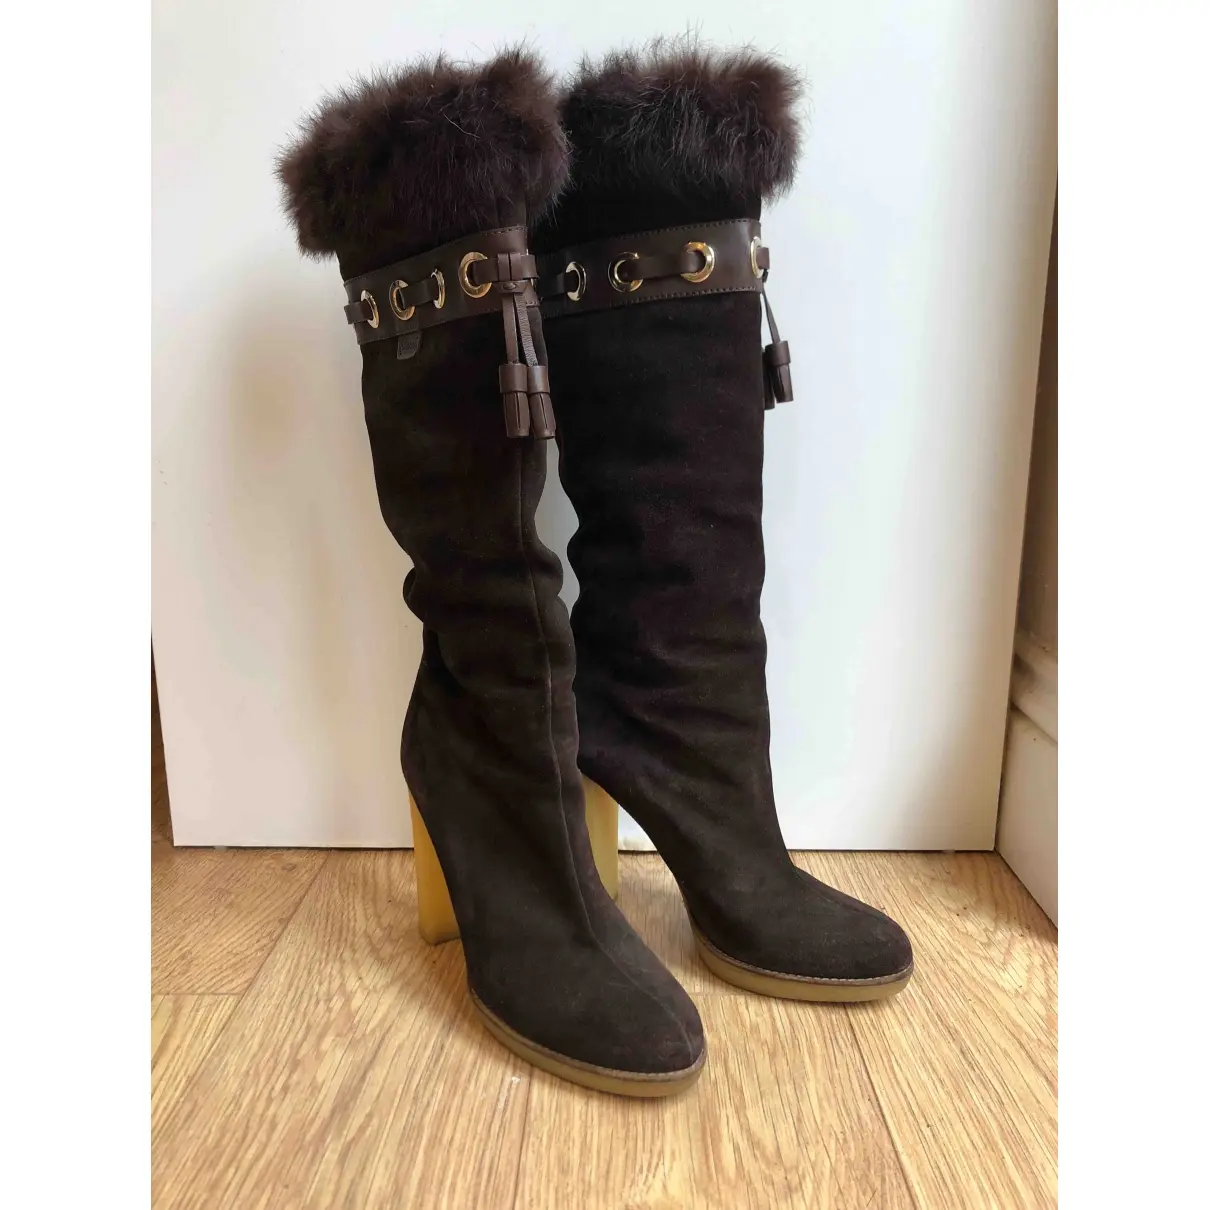 Gucci Boots for sale